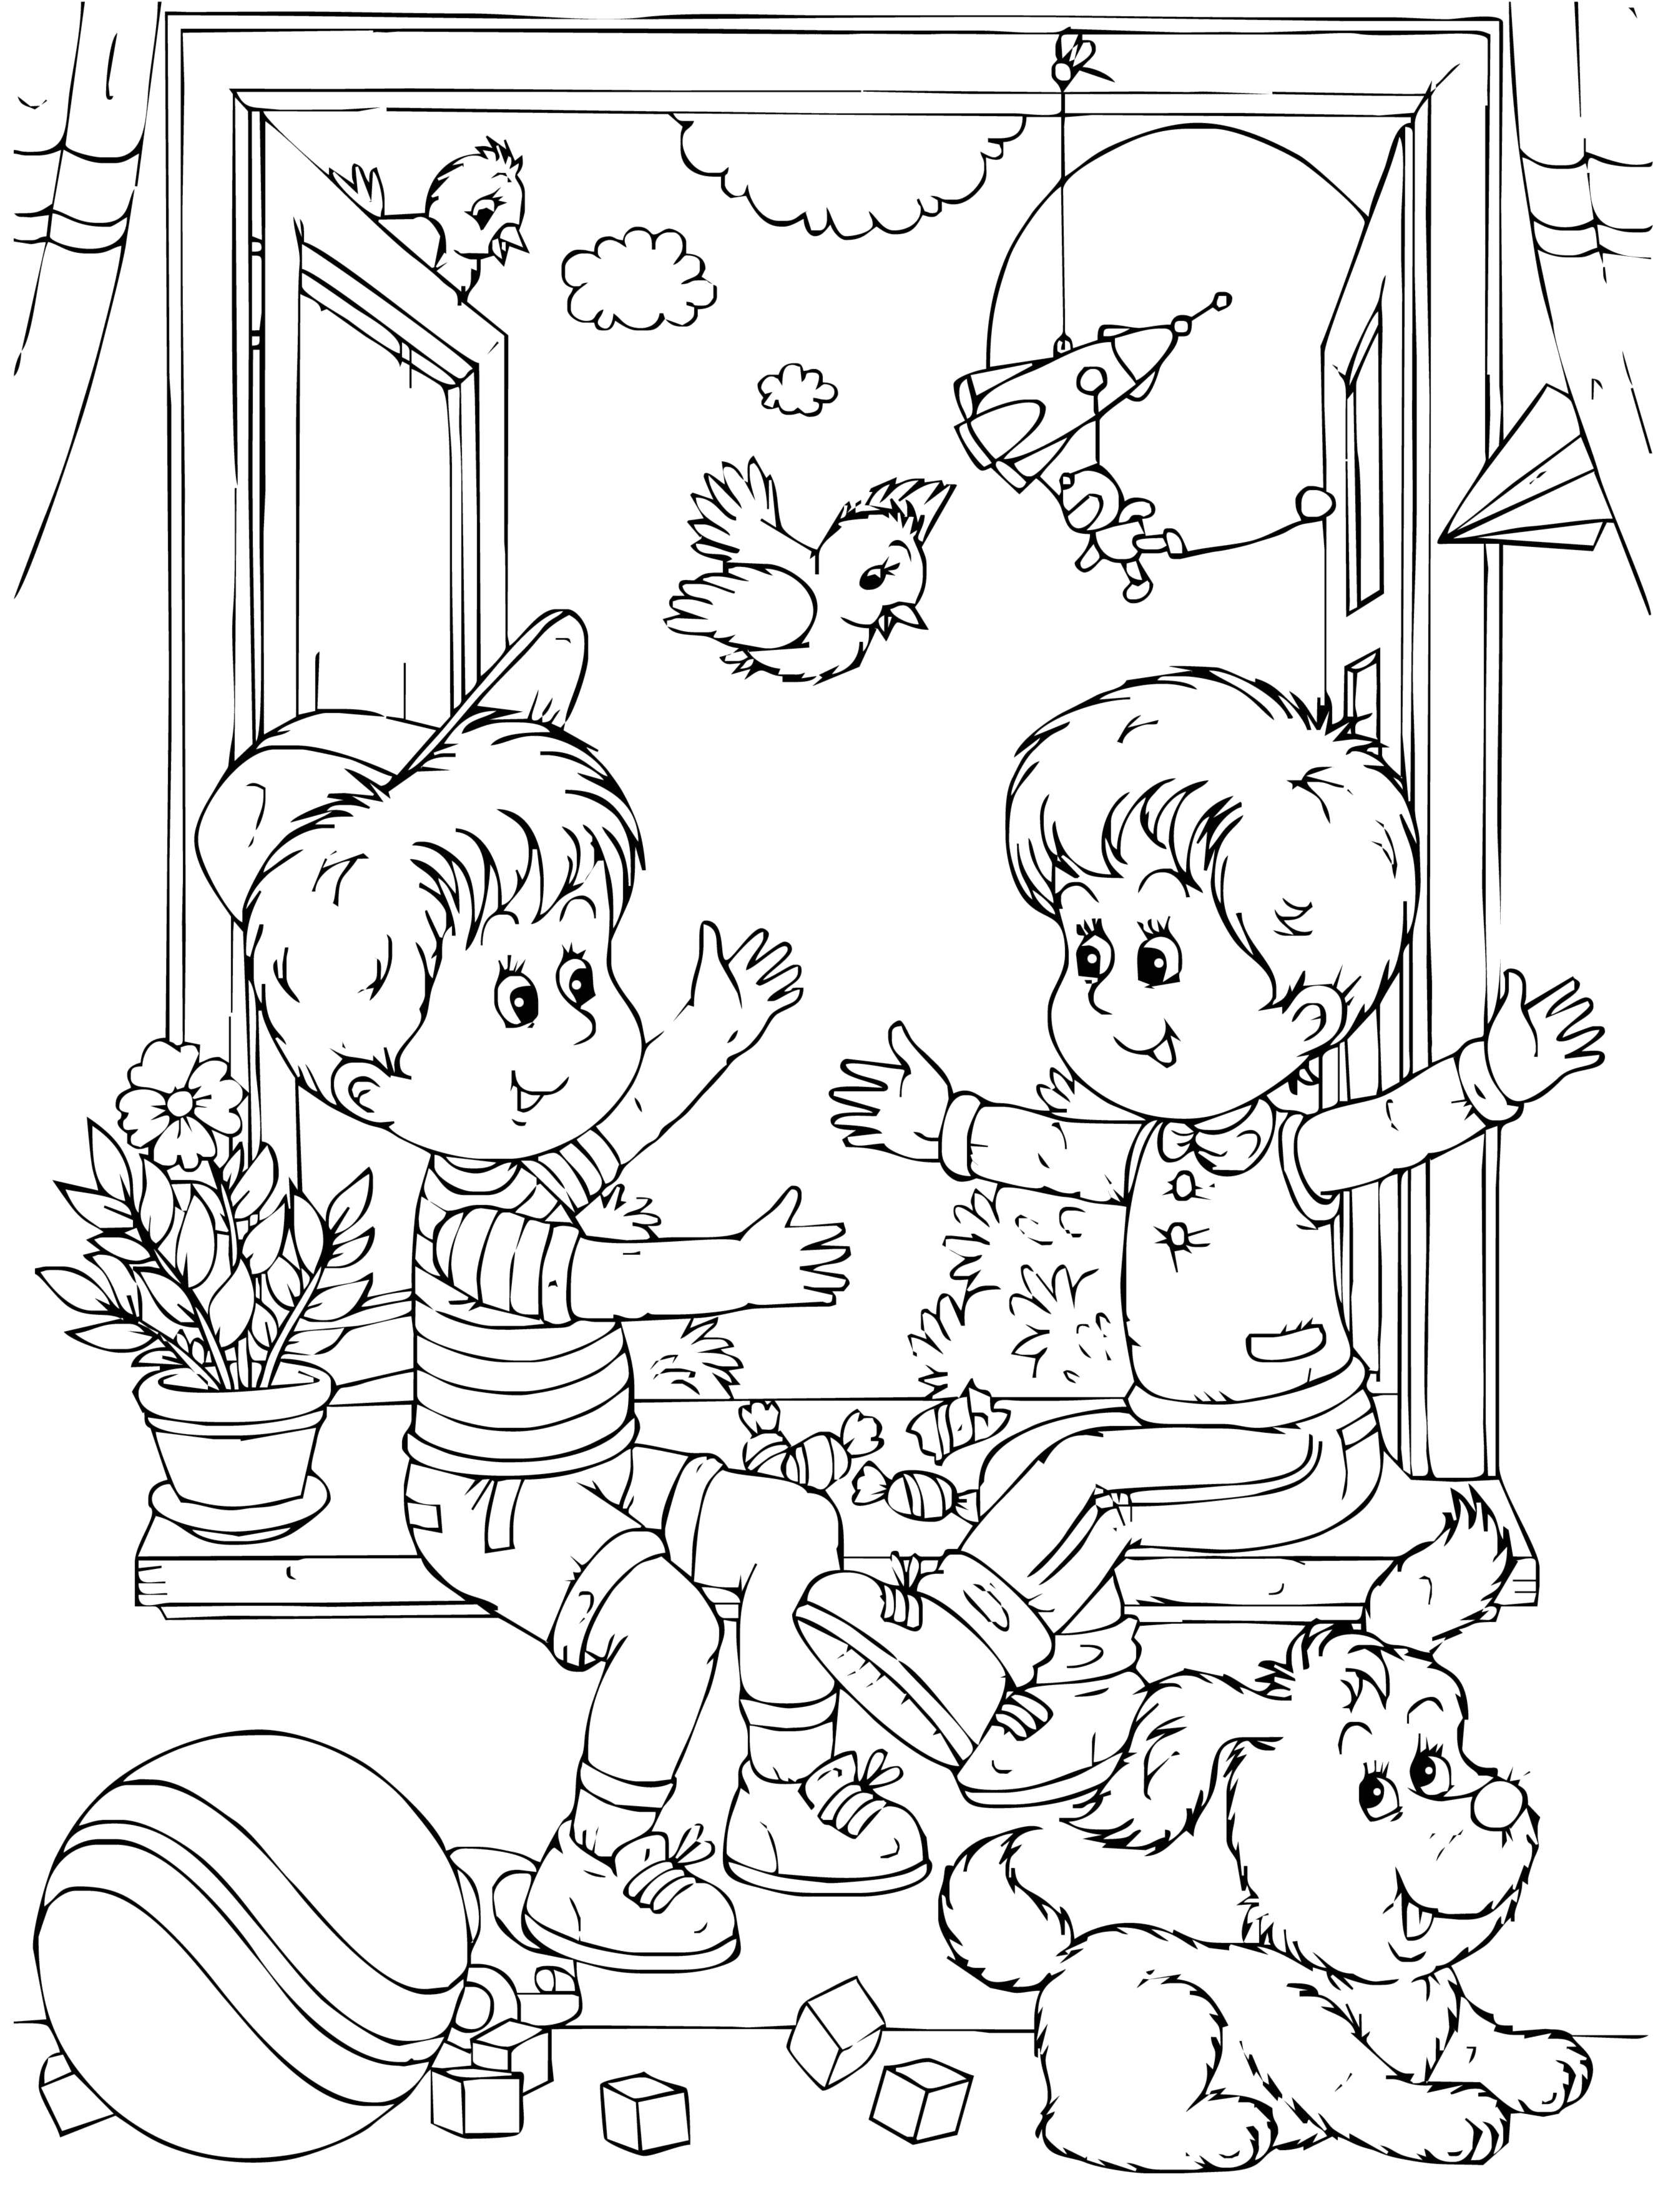 Coloring Friends guys. Category friendship. Tags:  Children, girl, boy.